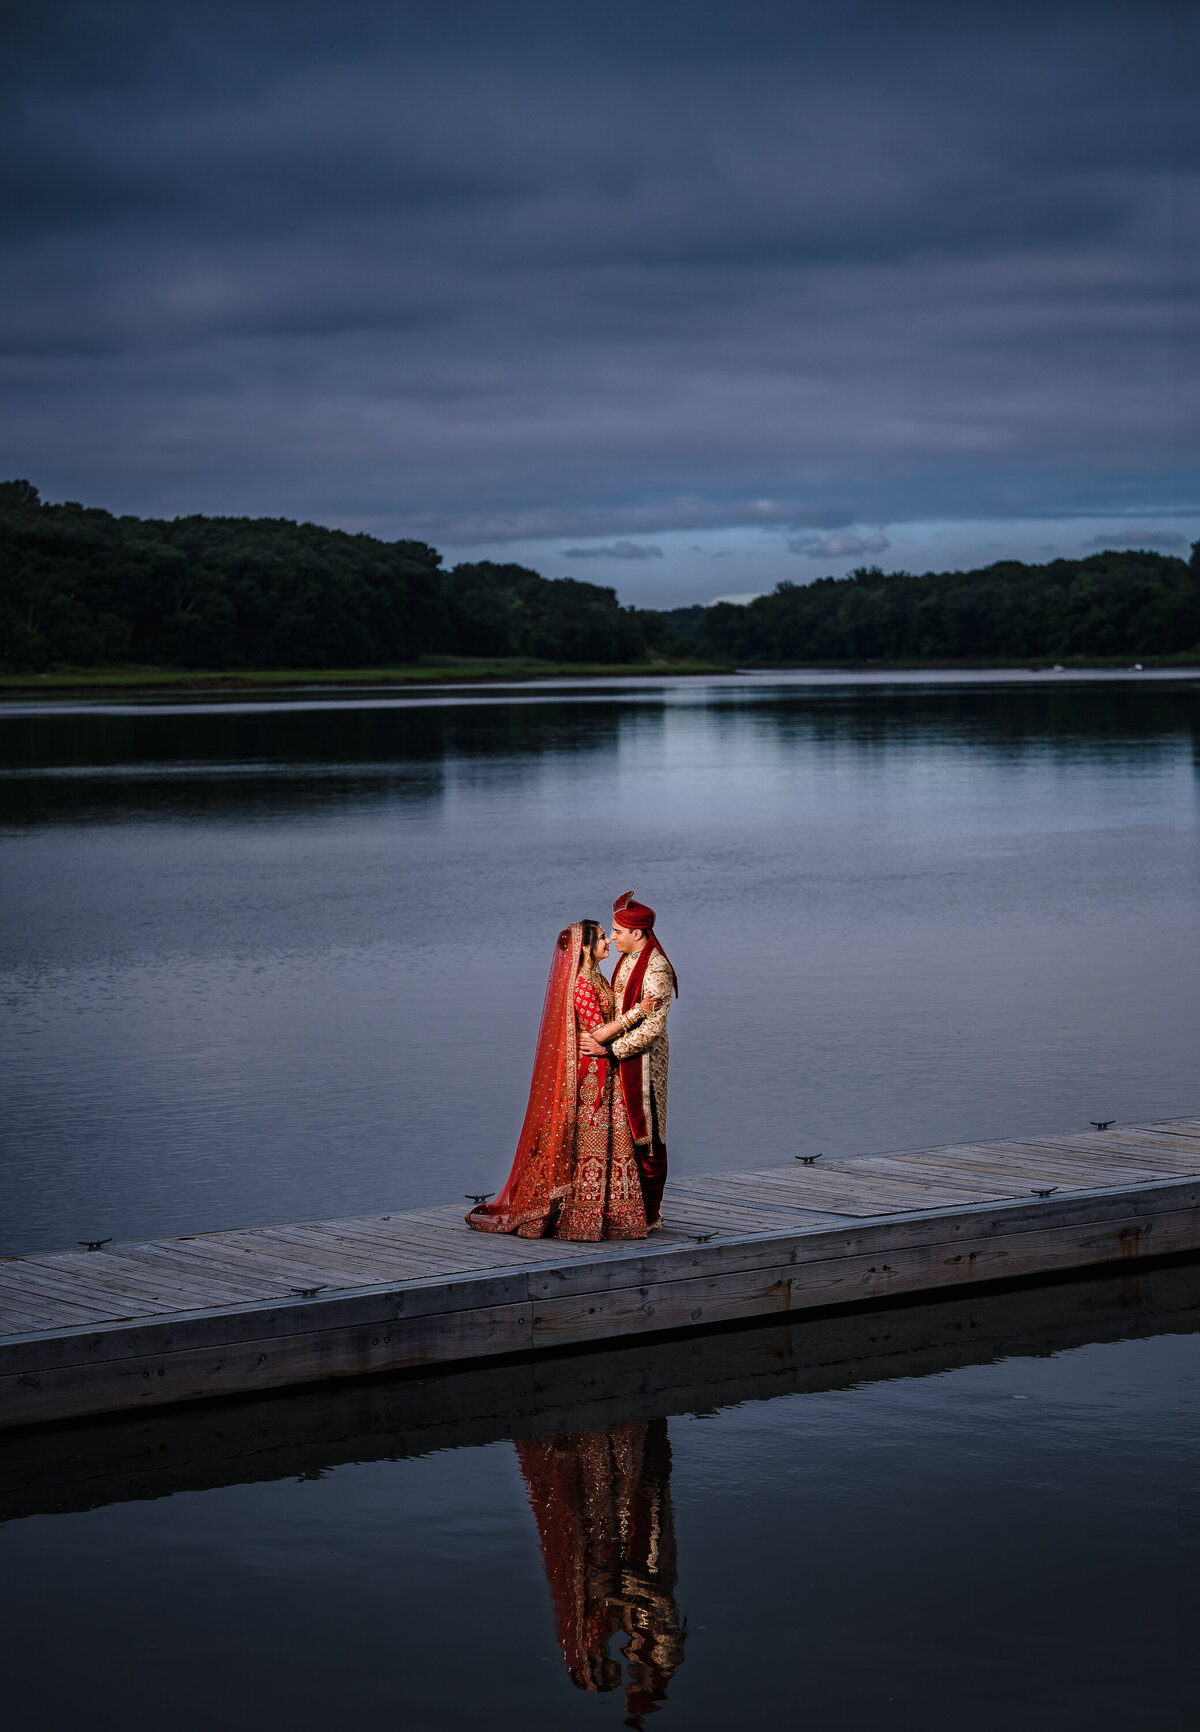 Looking for a creative NJ Indian wedding photographer? Check out Ishan Fotografi!